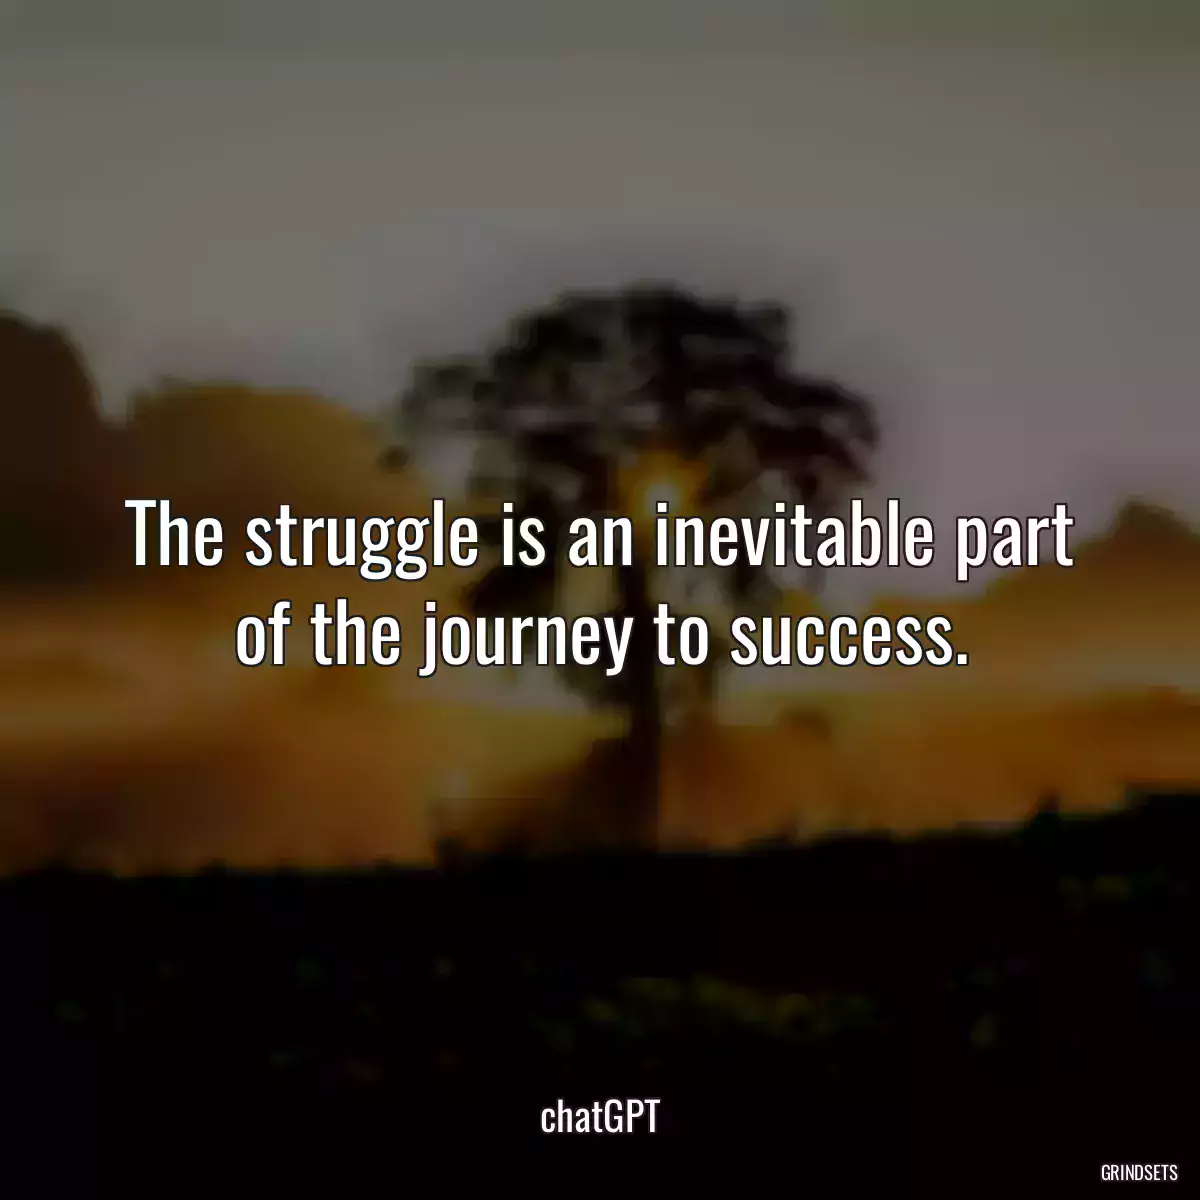 The struggle is an inevitable part of the journey to success.